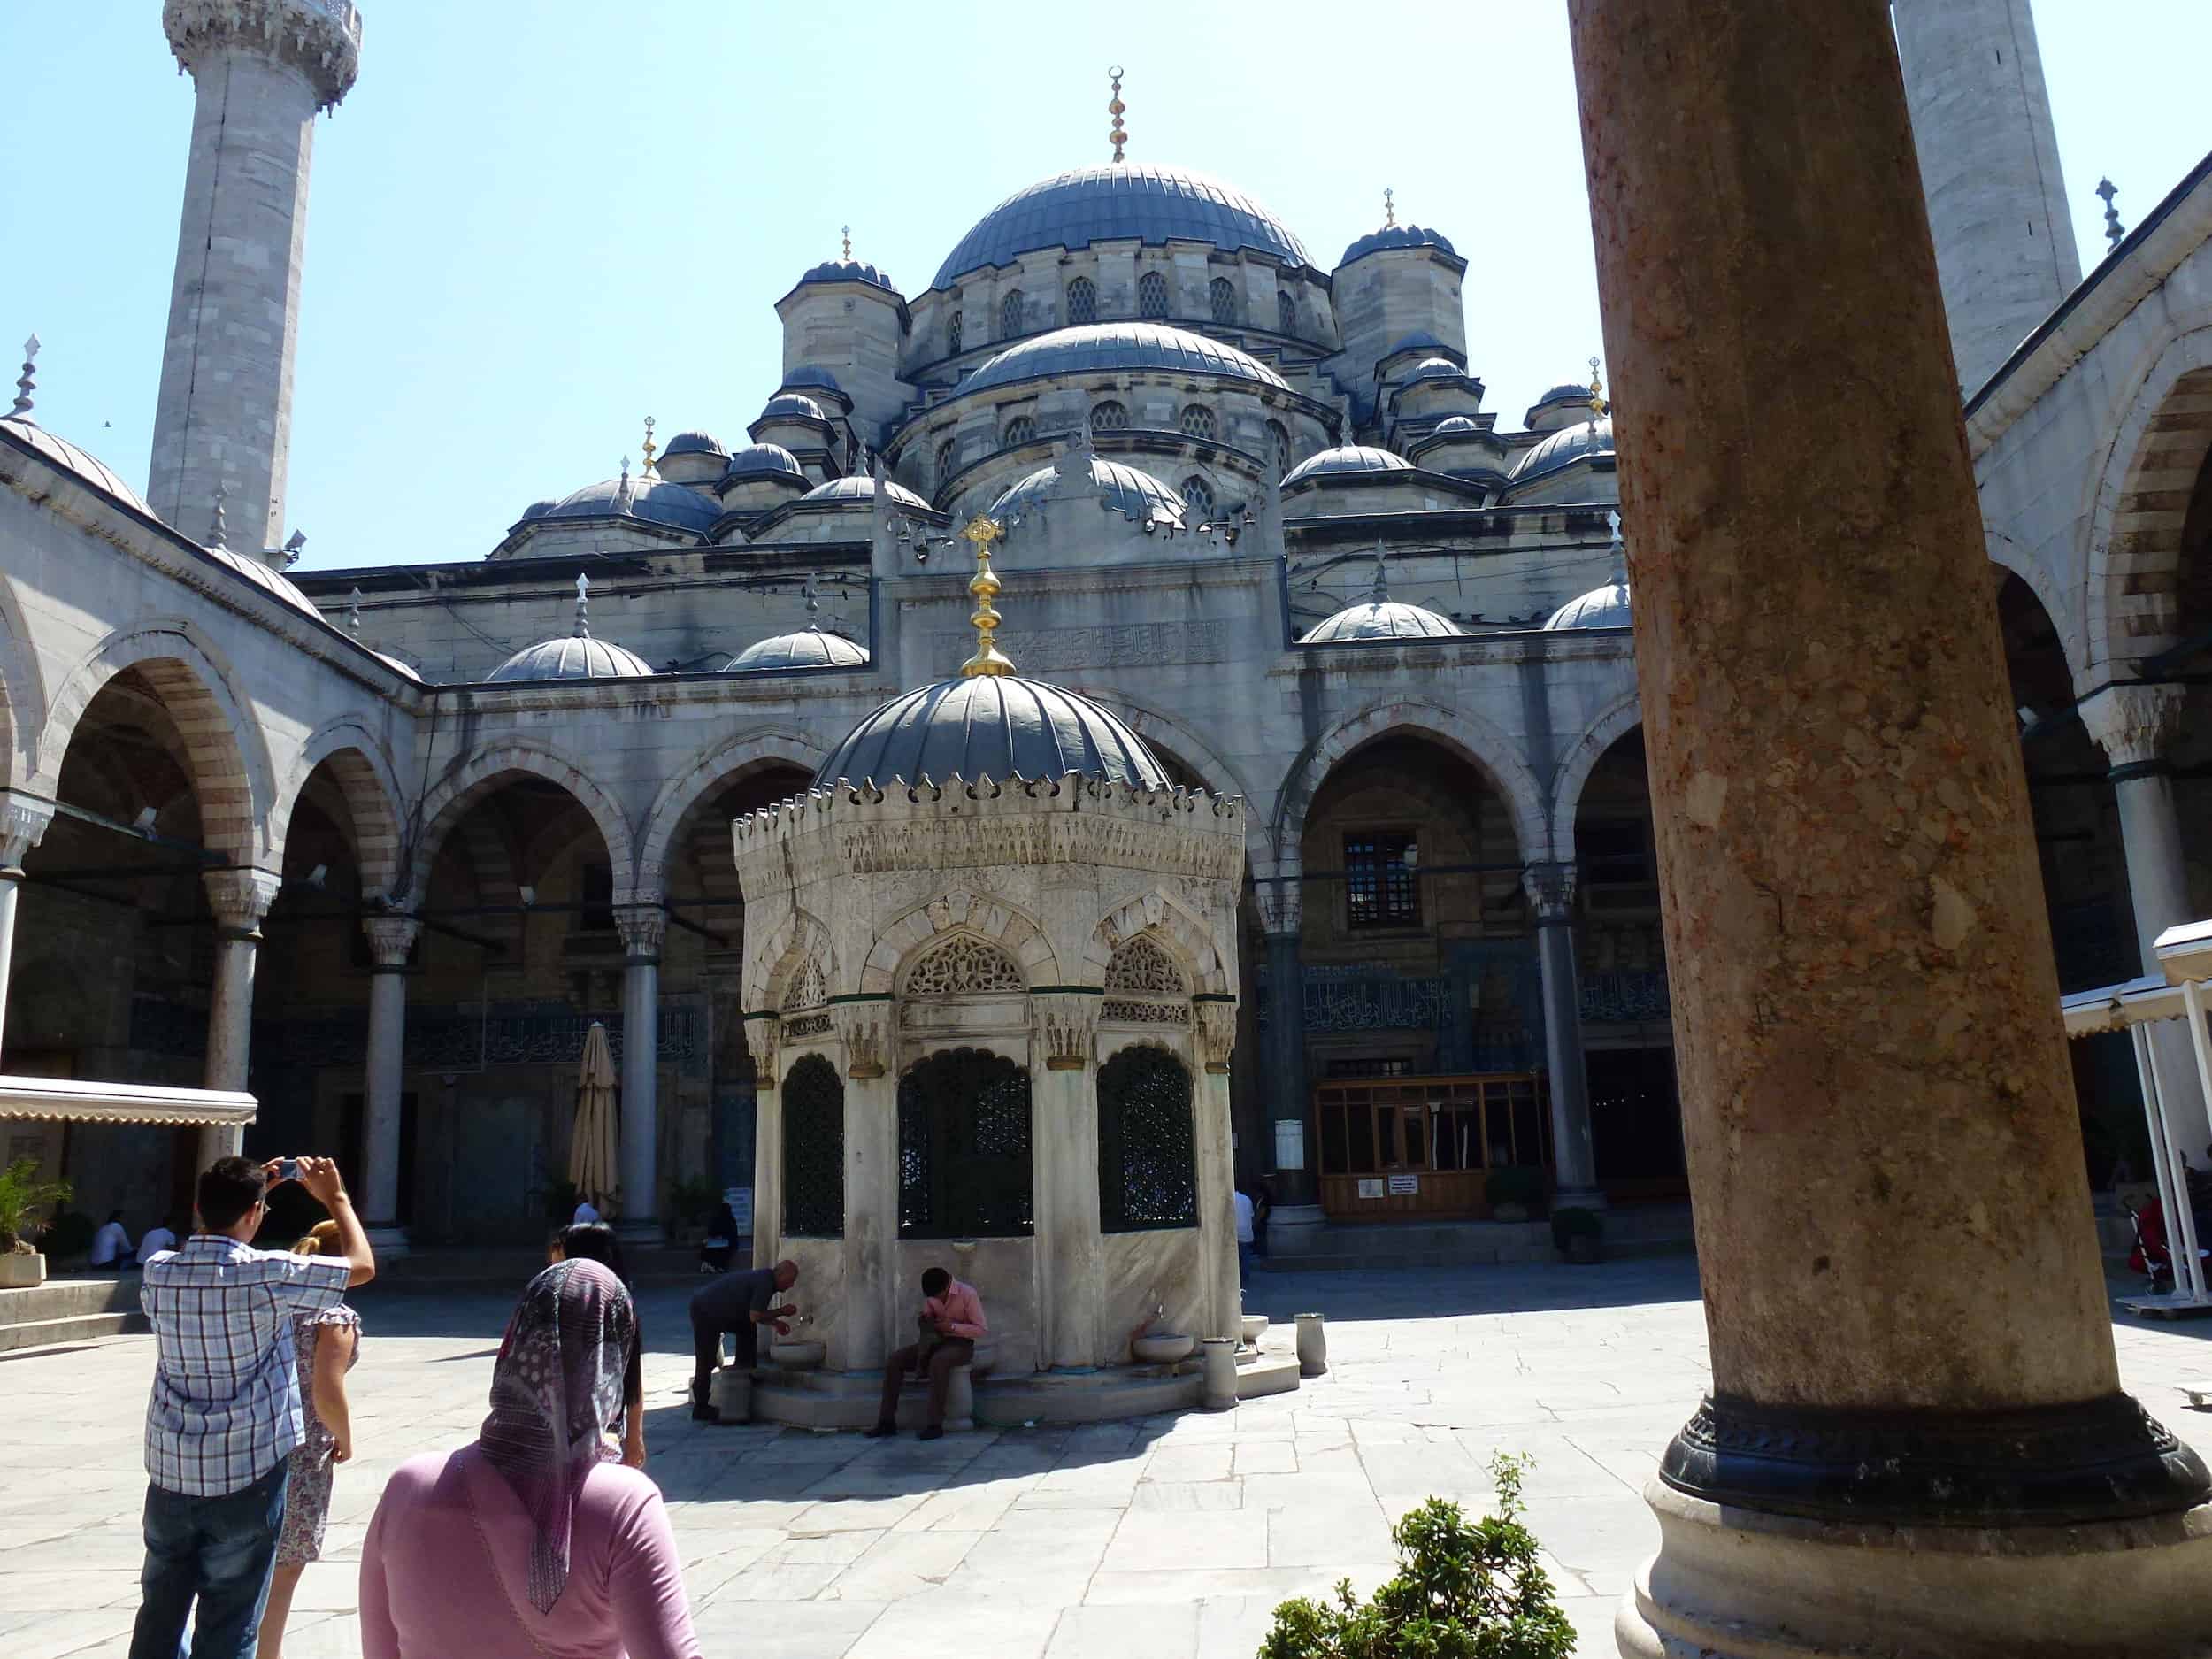 Courtyard of the New Mosque in Istanbul, Turkey